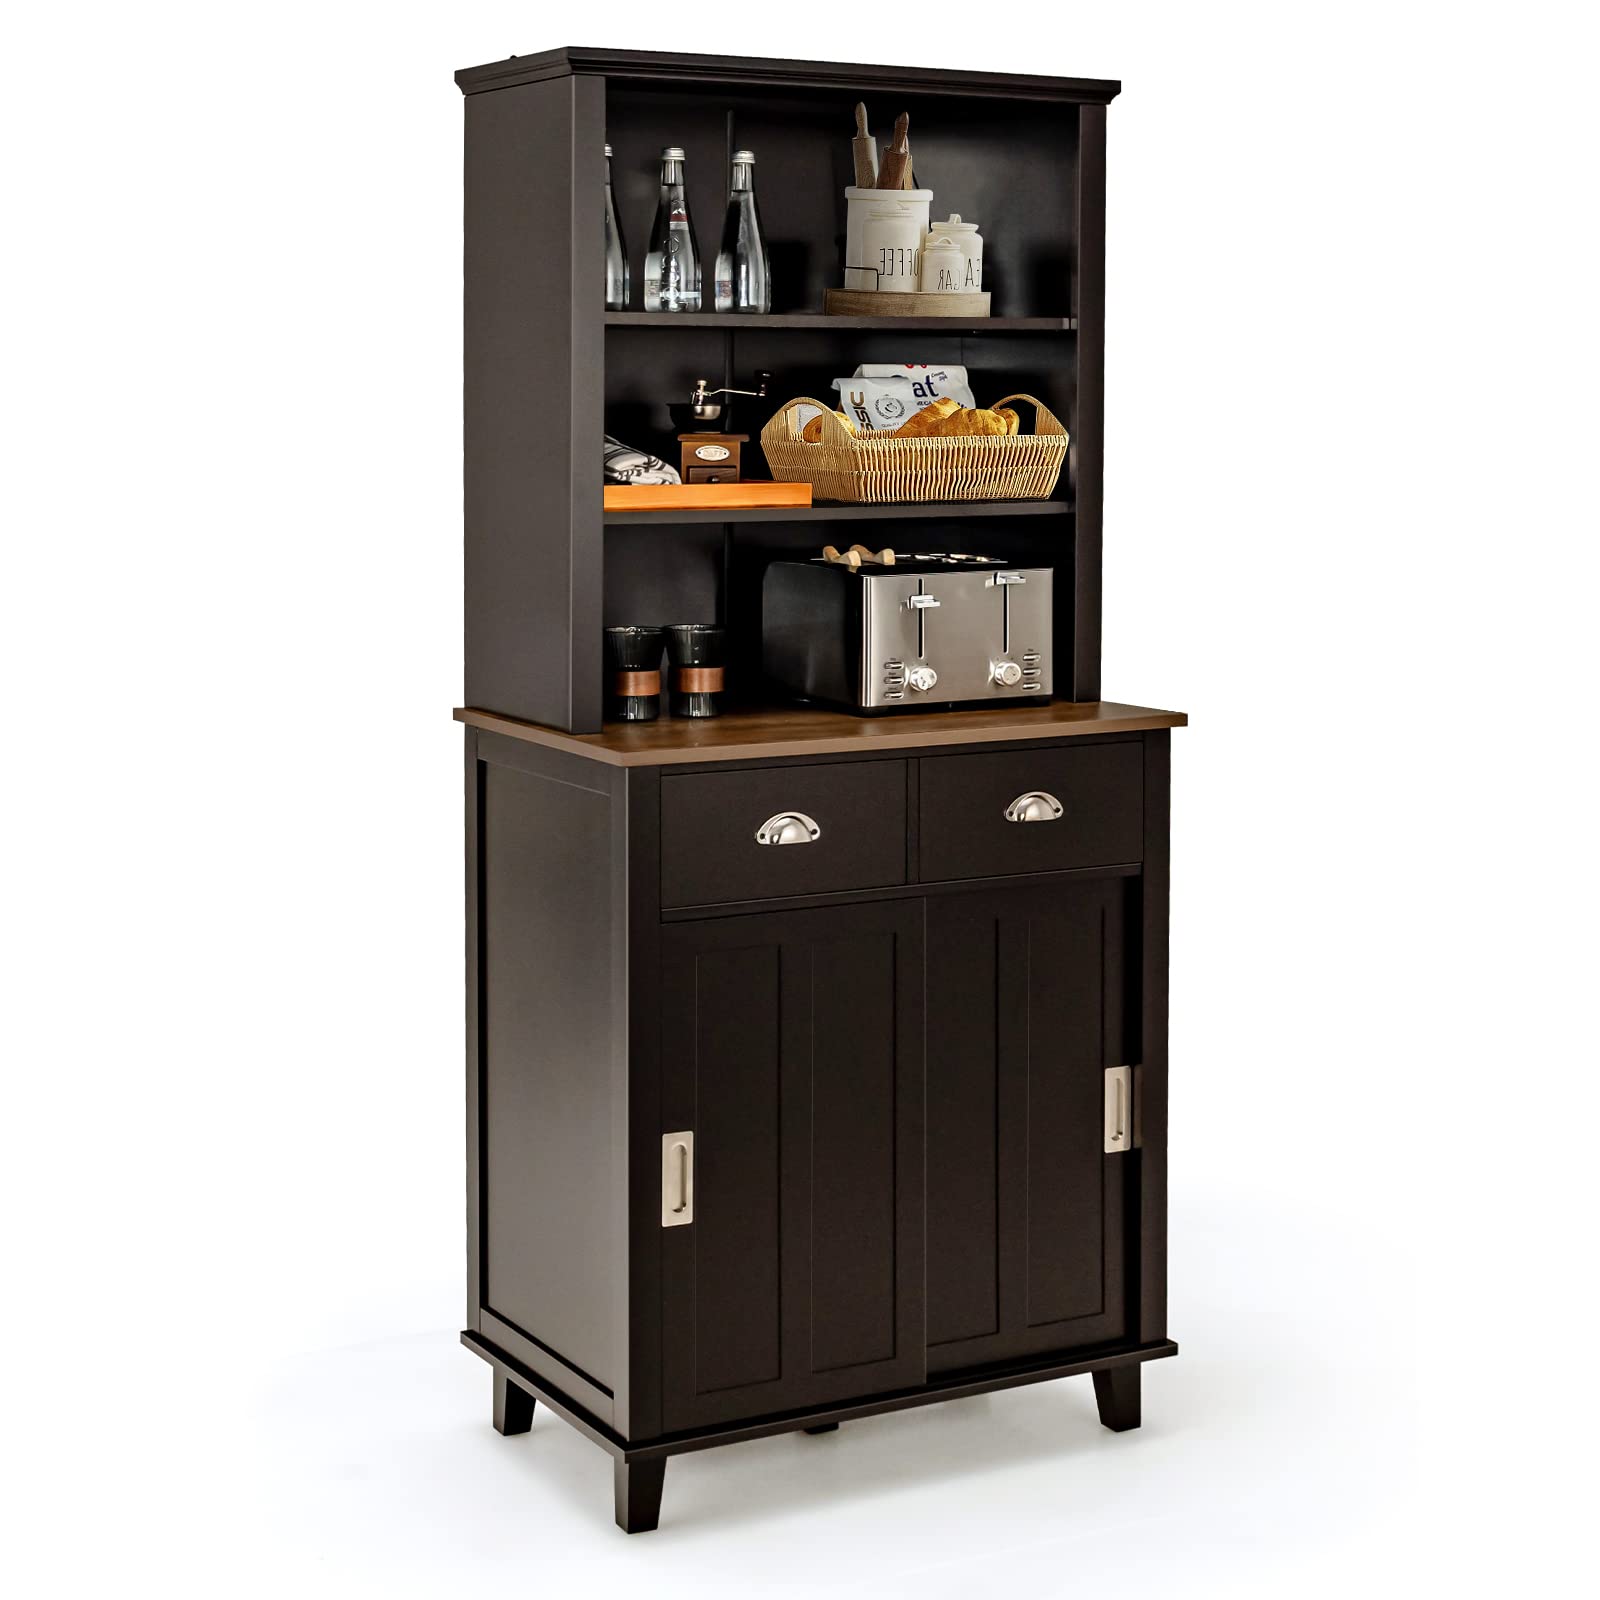 Giantex Buffet Hutch Storage Cabinet, Kitchen Pantry with 2 Drawers